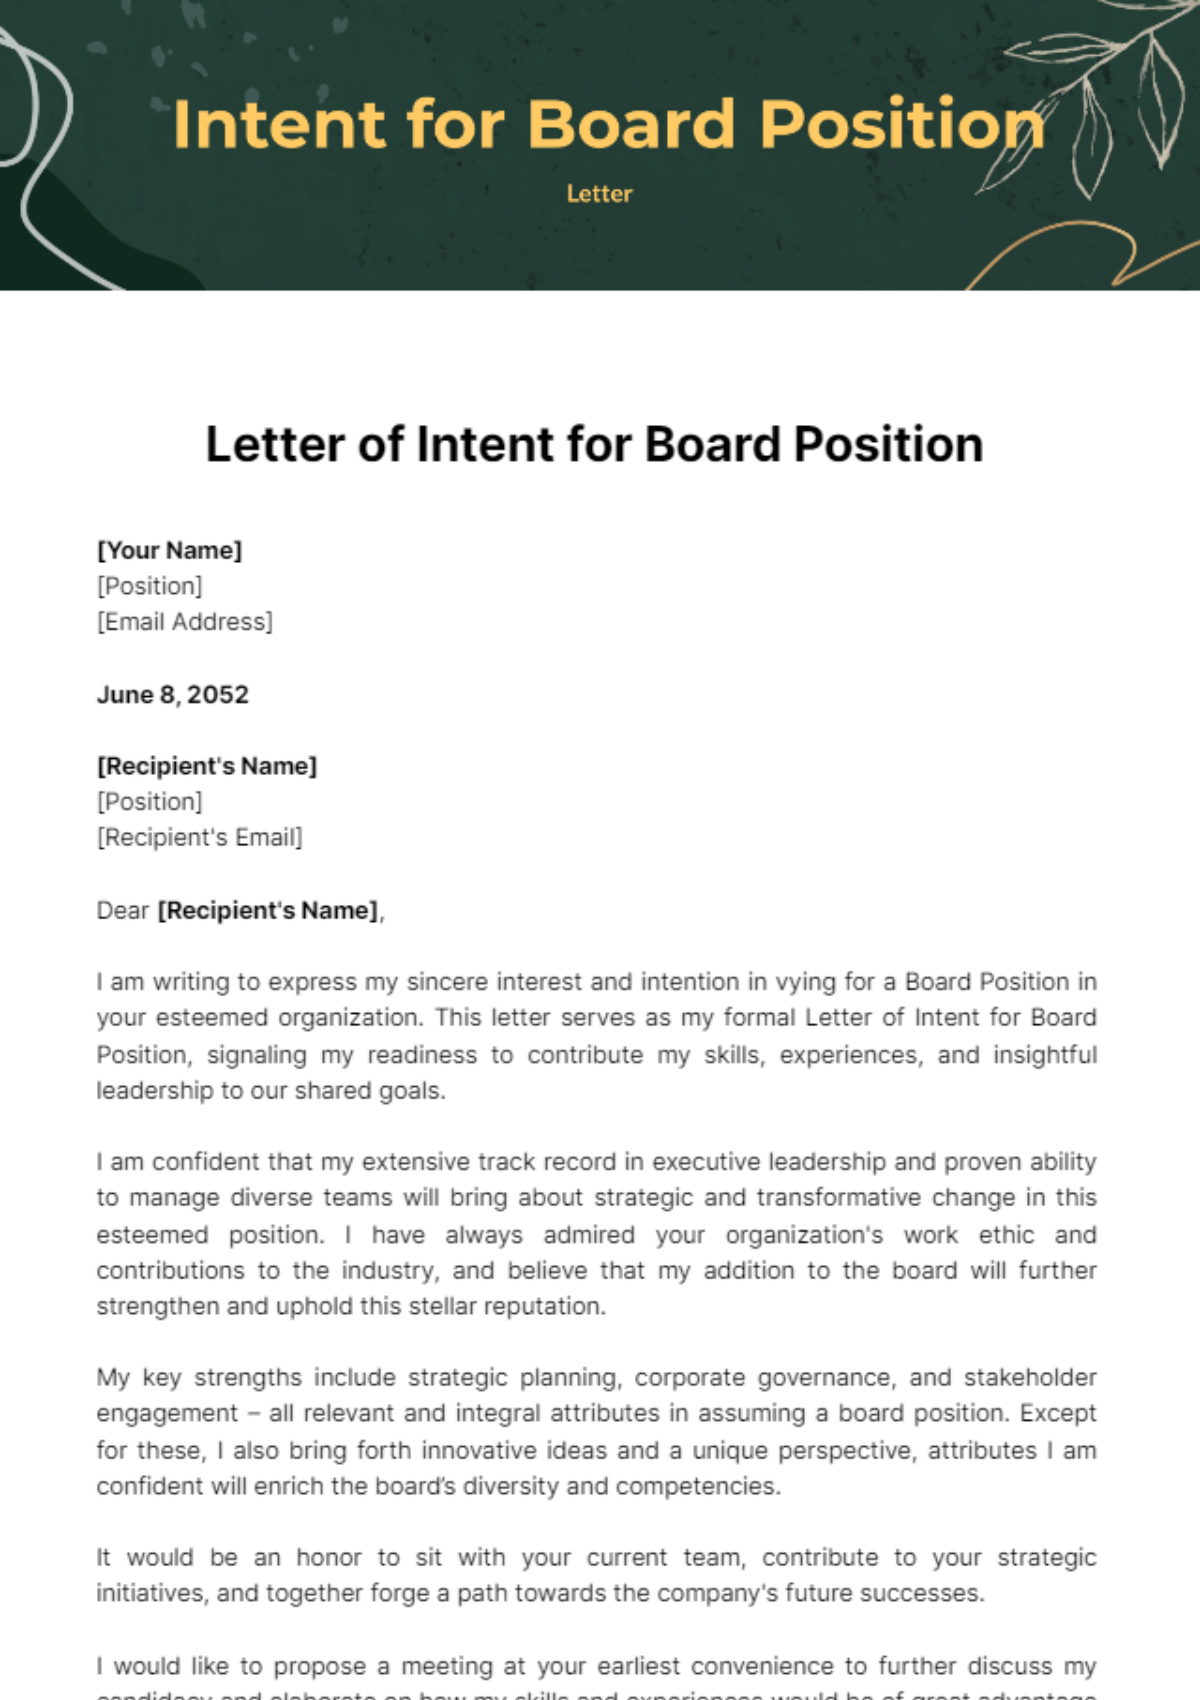 Free Letter of Intent for Board Position Template